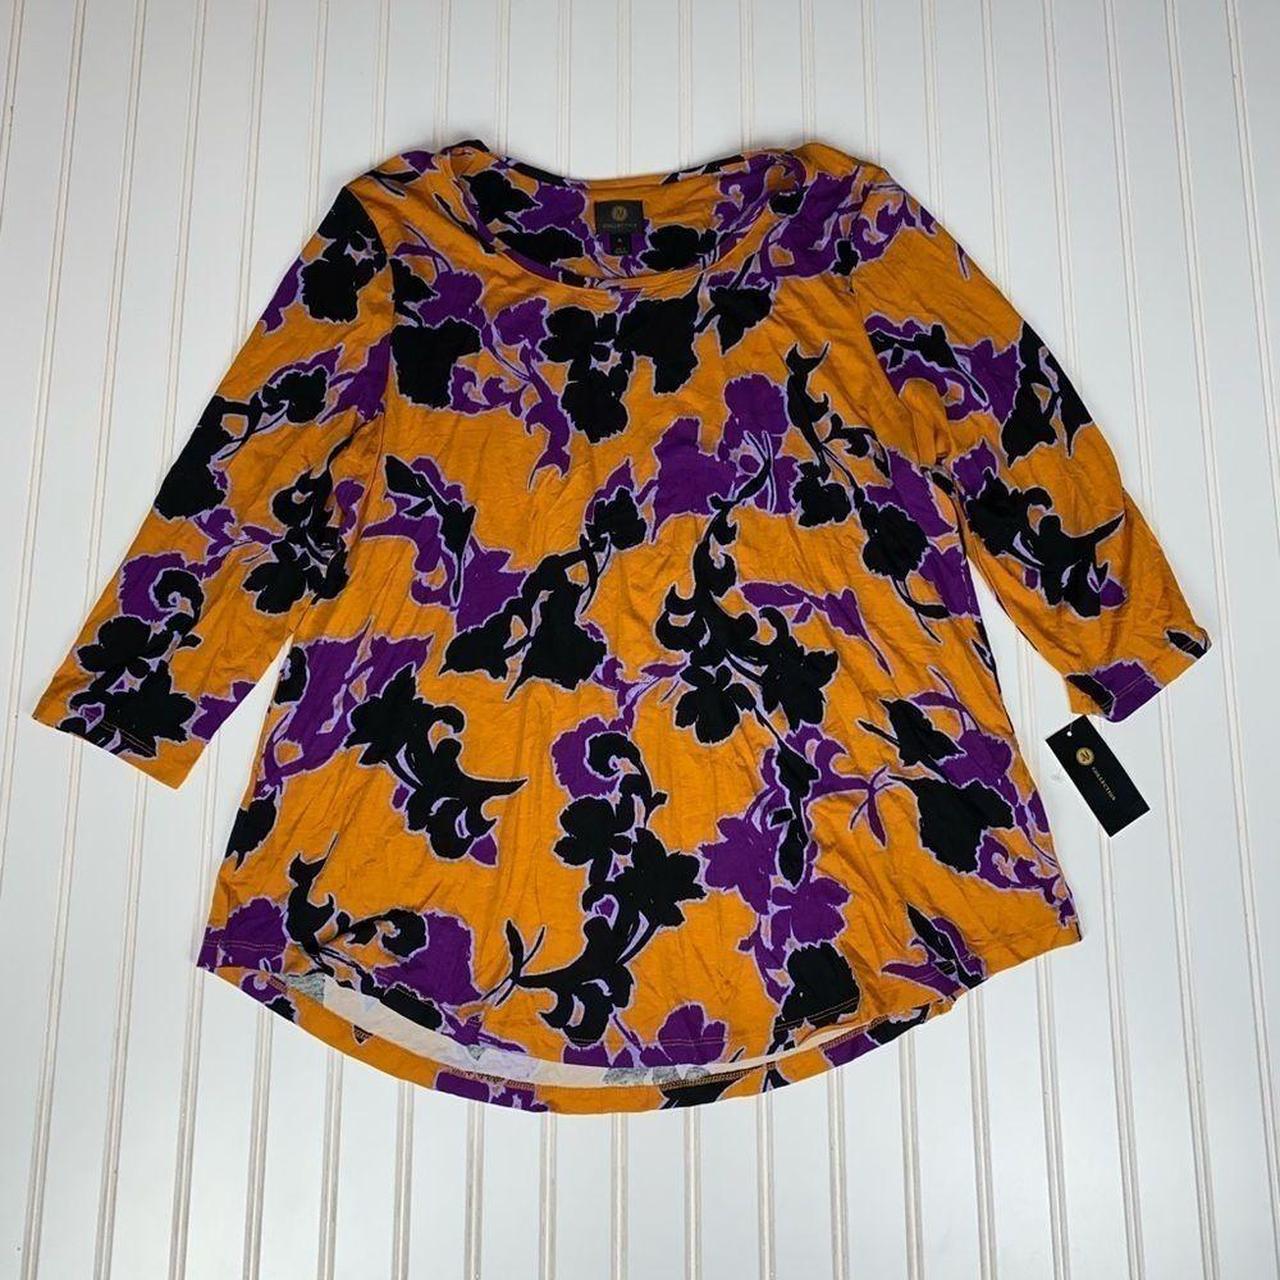 JM COLLECTION - Printed 3/4-Sleeve Top